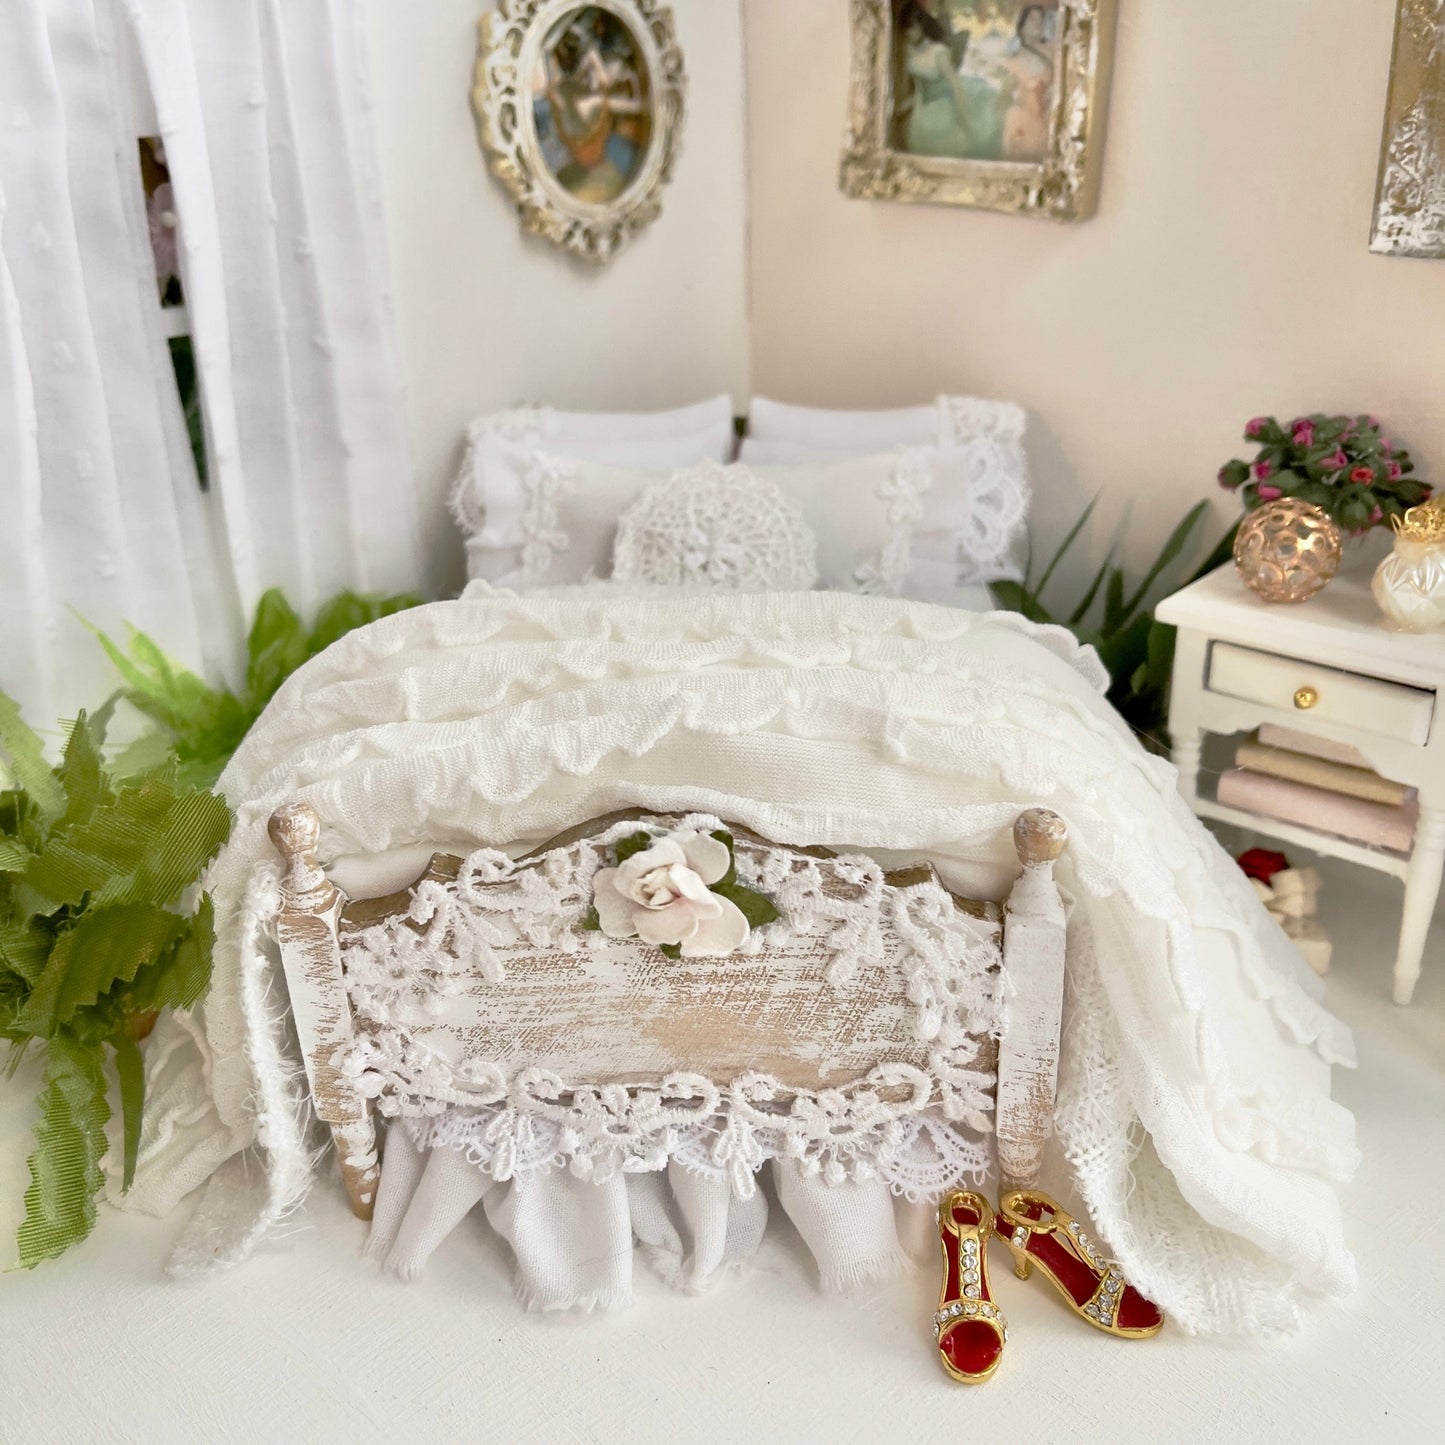 Chantallena Doll House Dressed Bed | White Cotton with Blue Cluster Roses, Stripes, Lace Accents, Ruffled Knit Throw | Something Blueoses